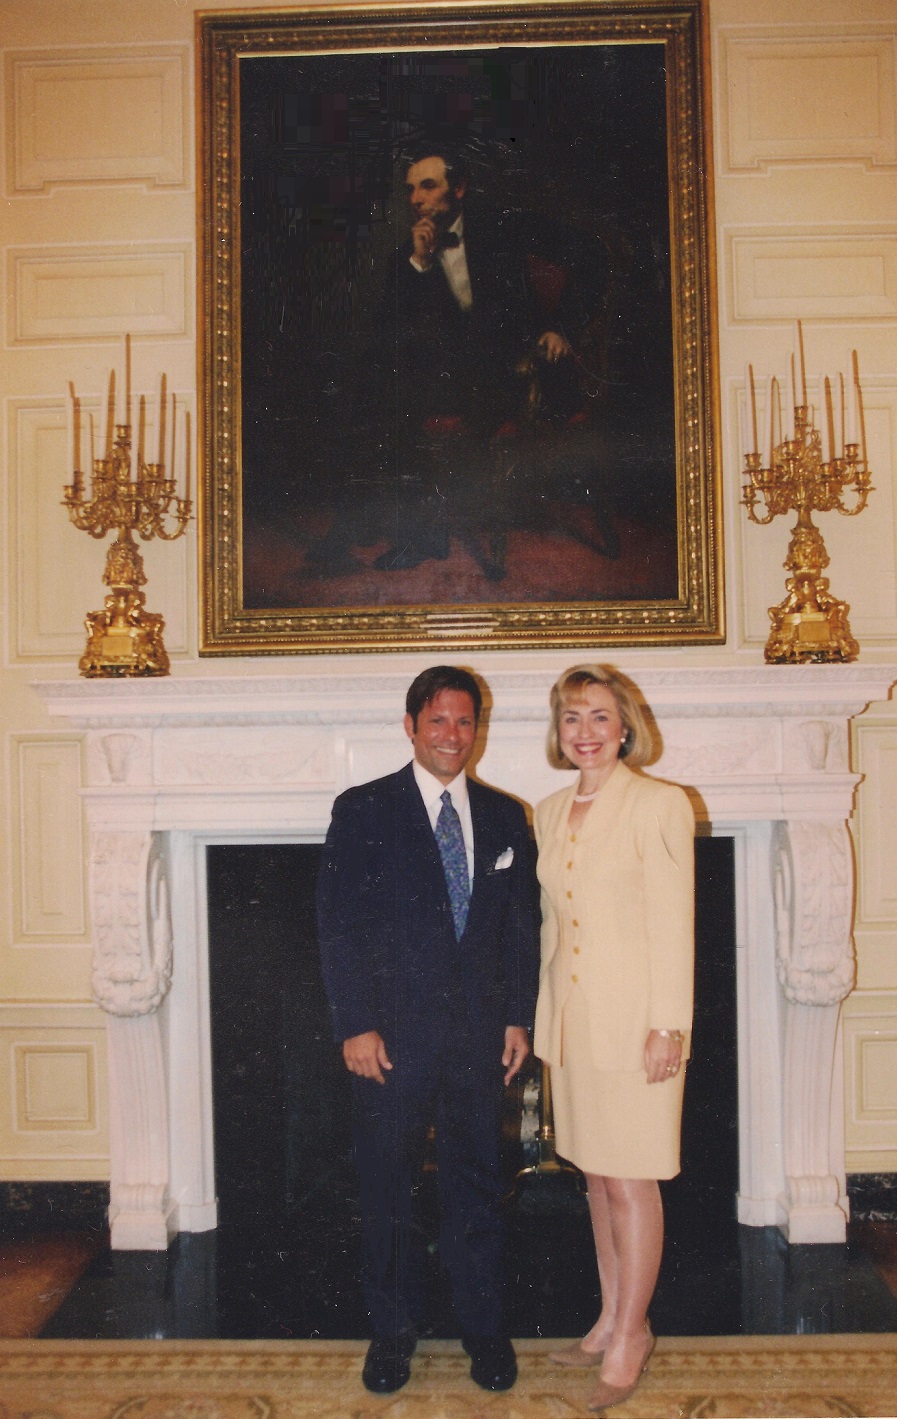 With Hillary Clinton after an East Room lecture, 1997.